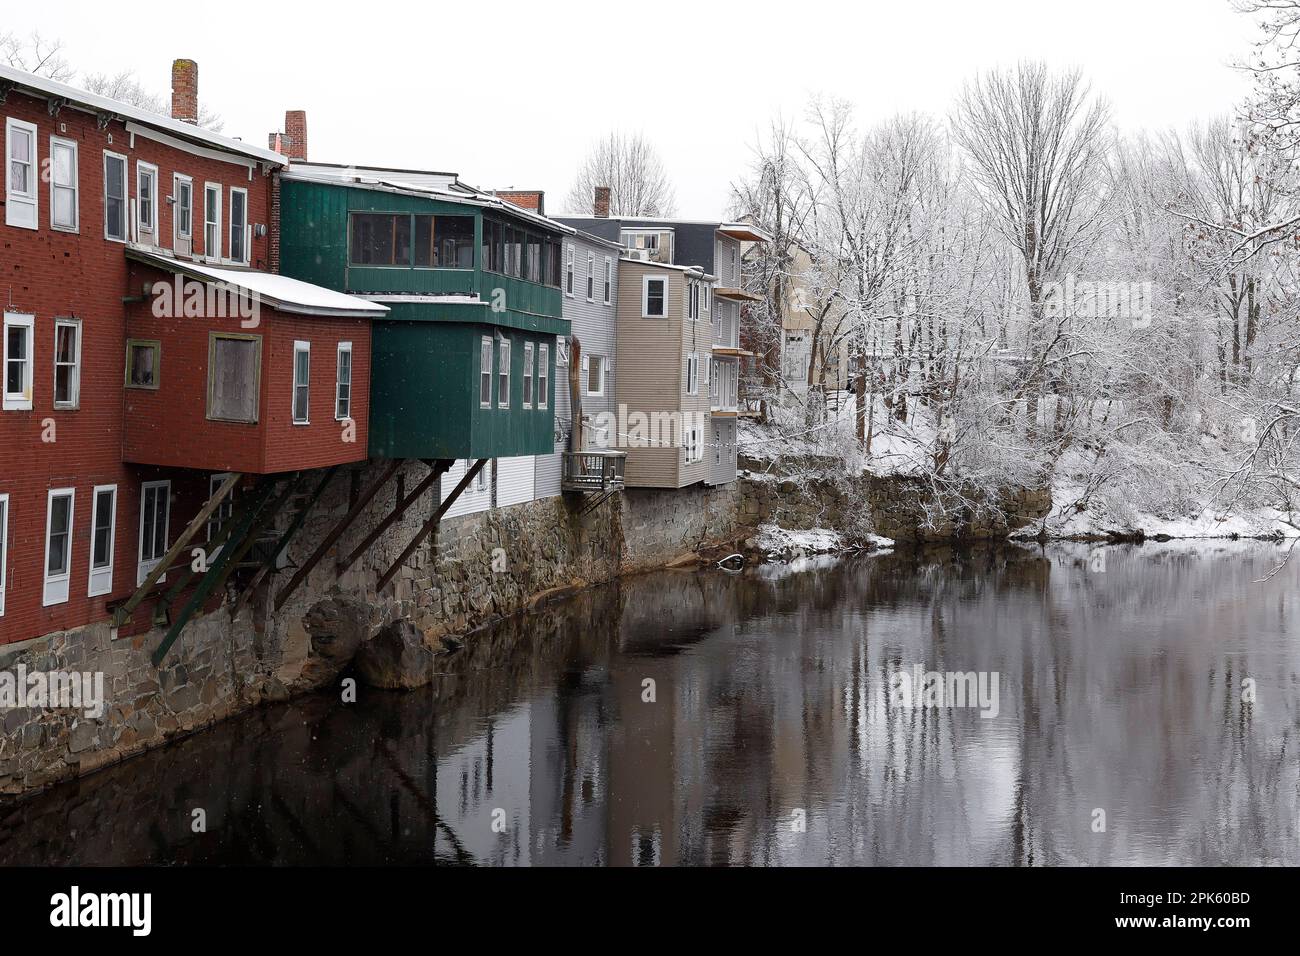 The backs of these apartments face the river in downtown Milford, NH.Taken from The Stone Bridge. This is The Souhegan River and reflections. Stock Photo